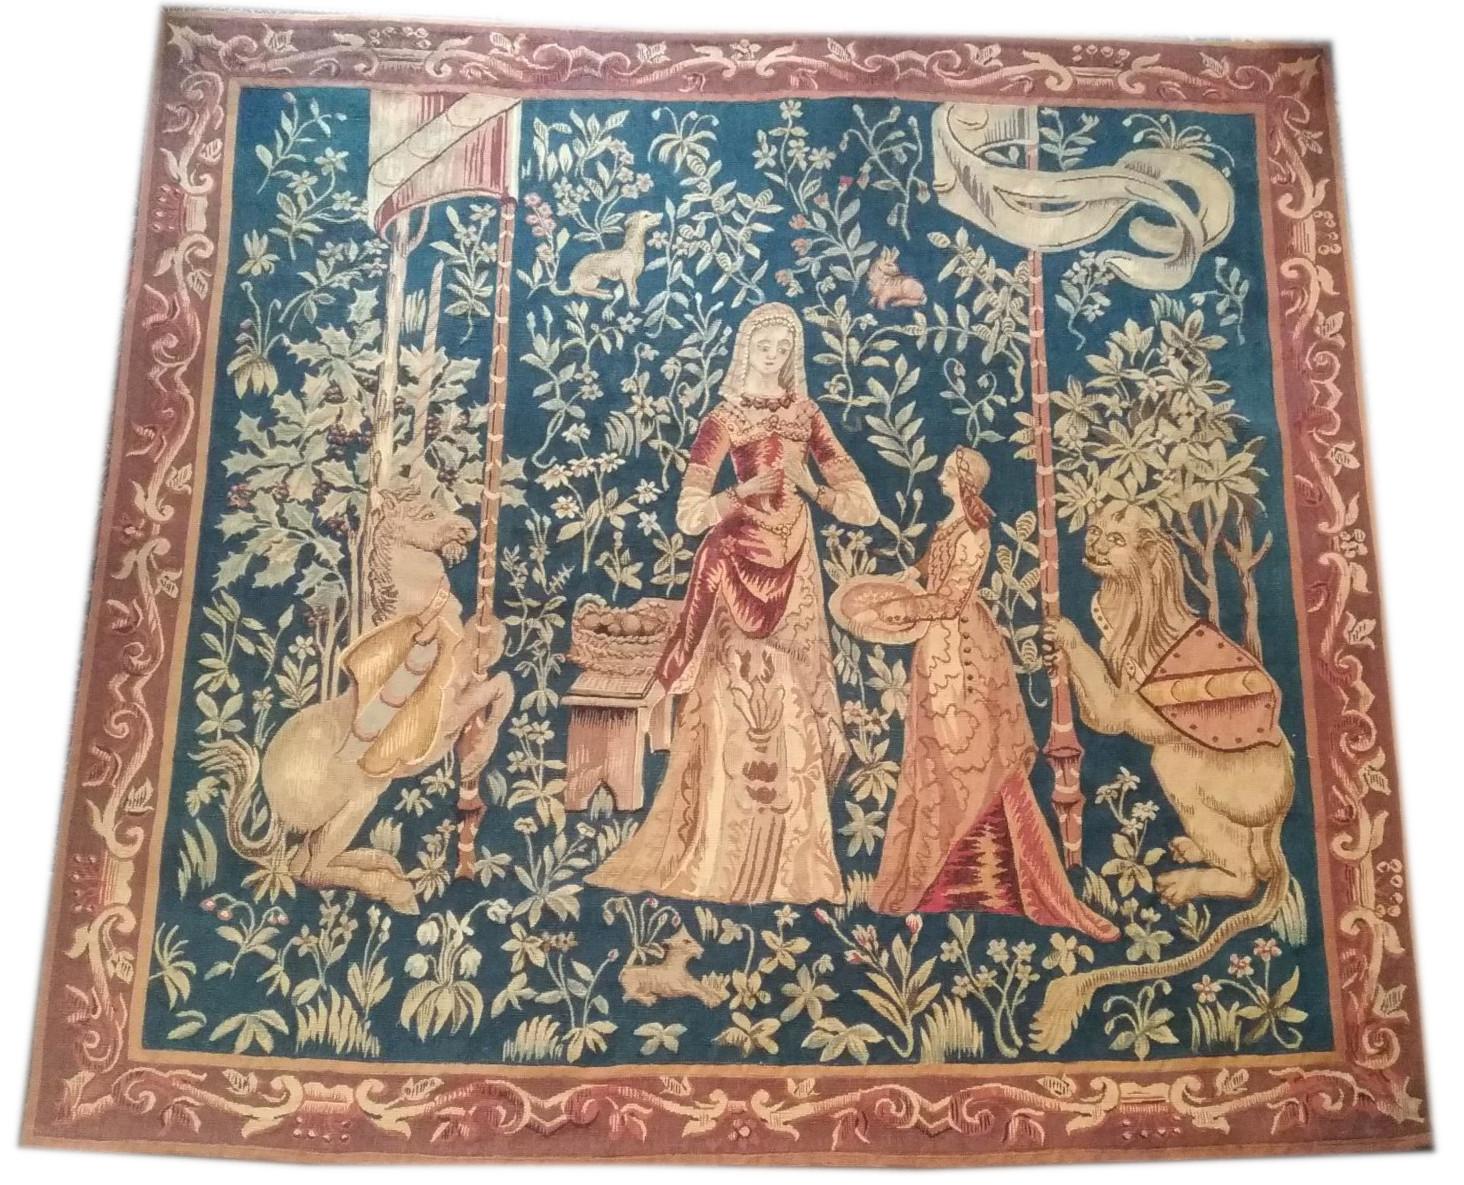  1107 - Aubusson Tapestry 19th Century Lady with the Unicorn  For Sale 3